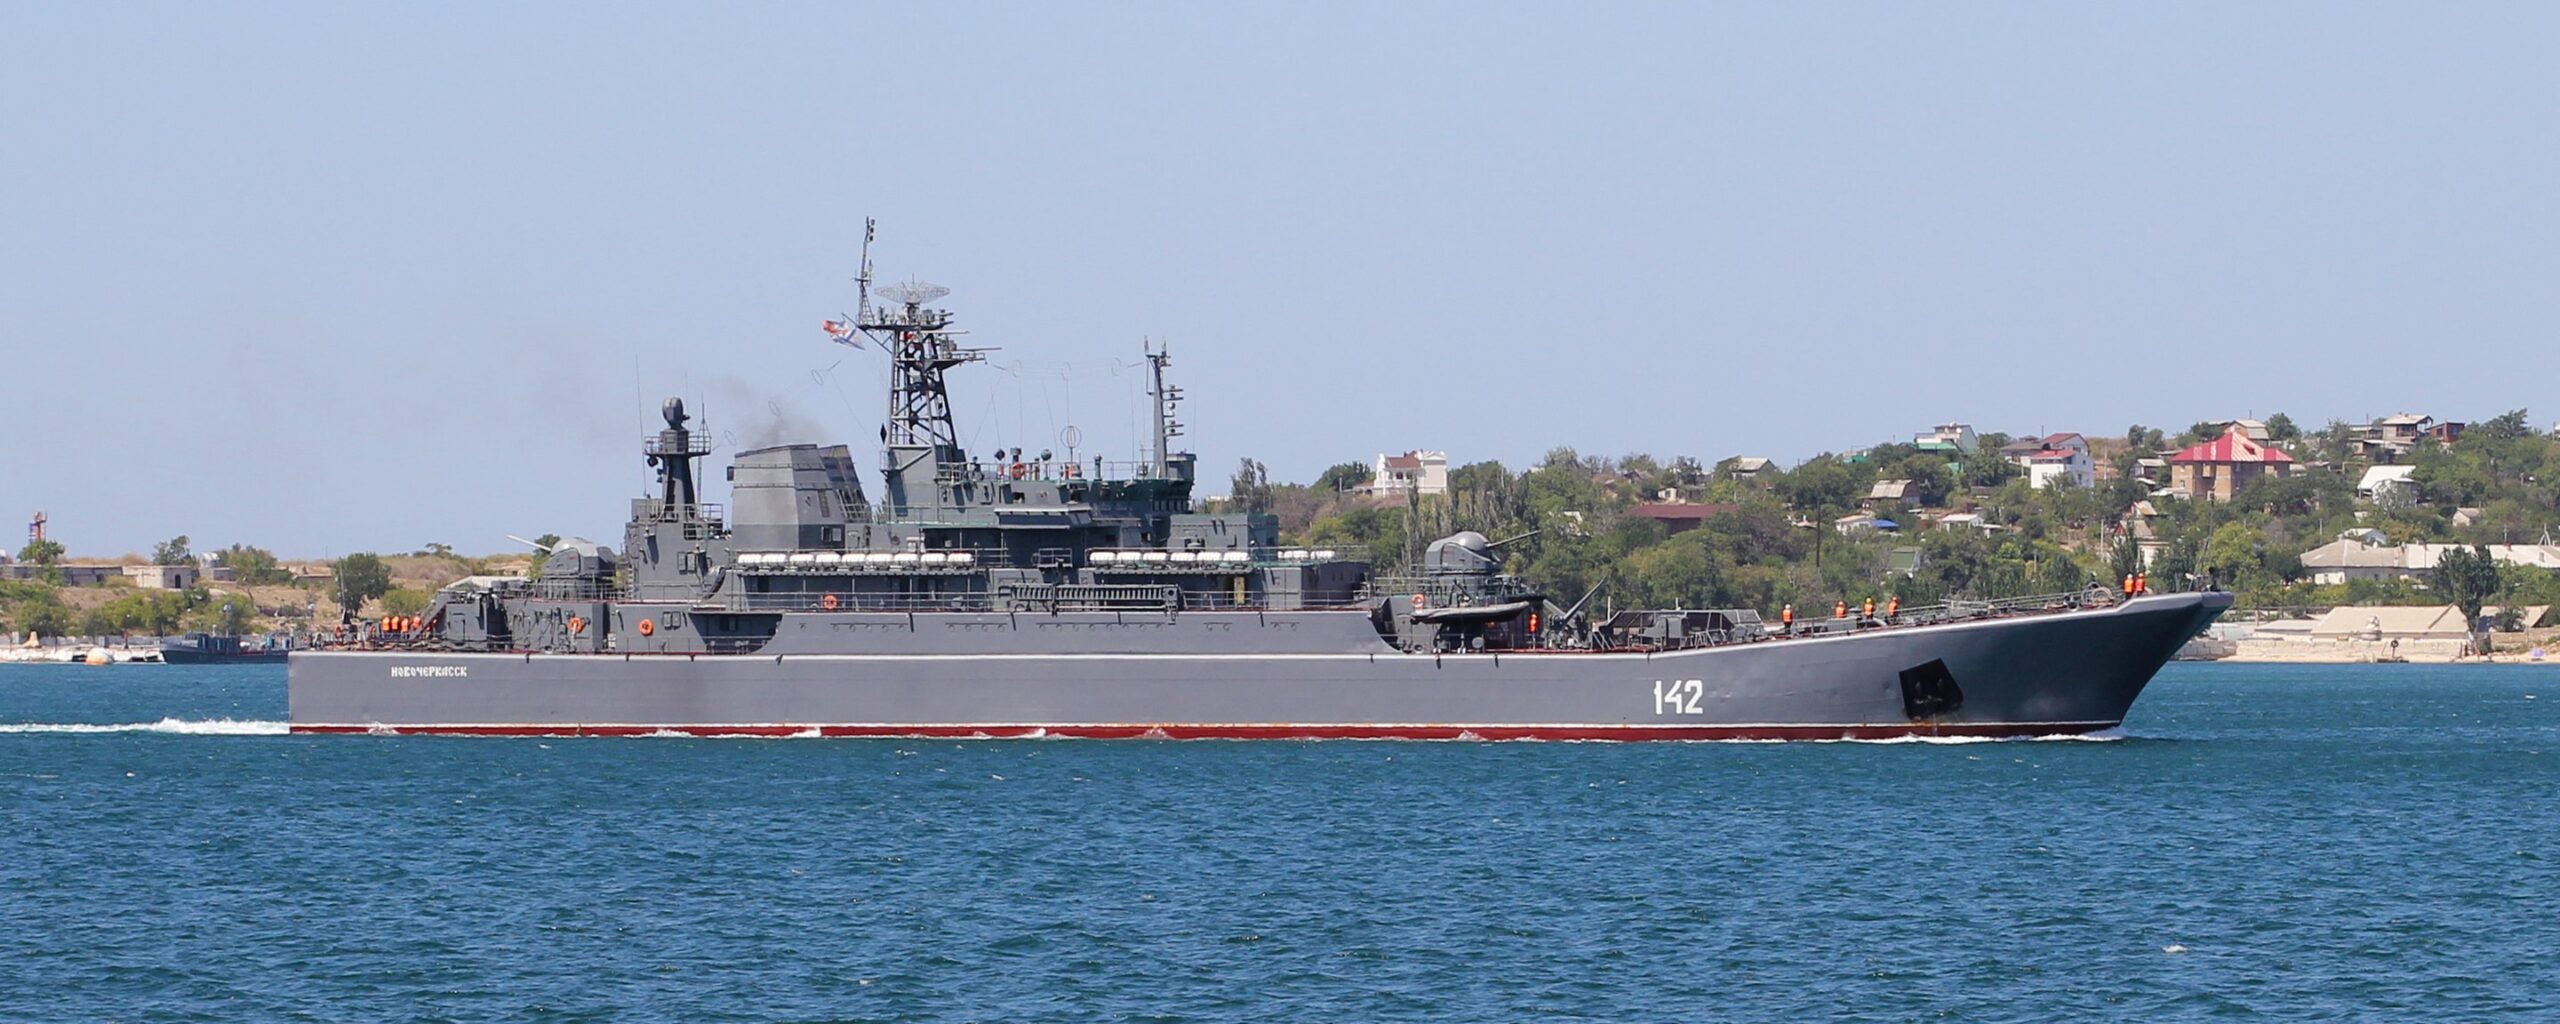 Novocherkassk (BDK-46) is a large landing ship of Project 775 (775 / II) of Ropucha class, which is in service with the Black Sea Fleet of the Russian Navy. Sevastopol bay
George Chernilevsky/Wikimedia Commons